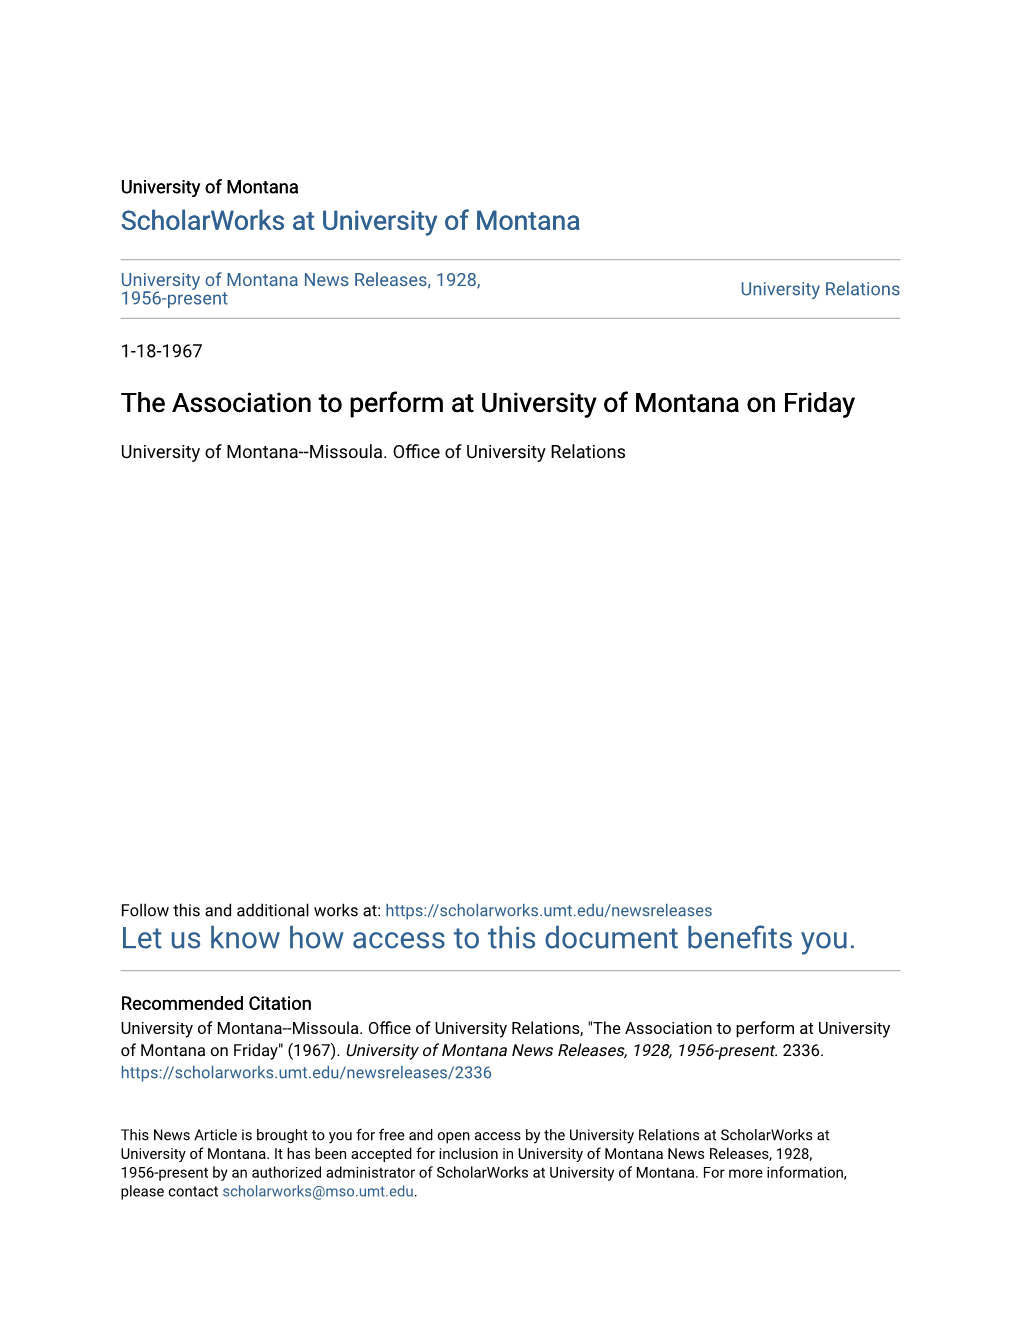 The Association to Perform at University of Montana on Friday